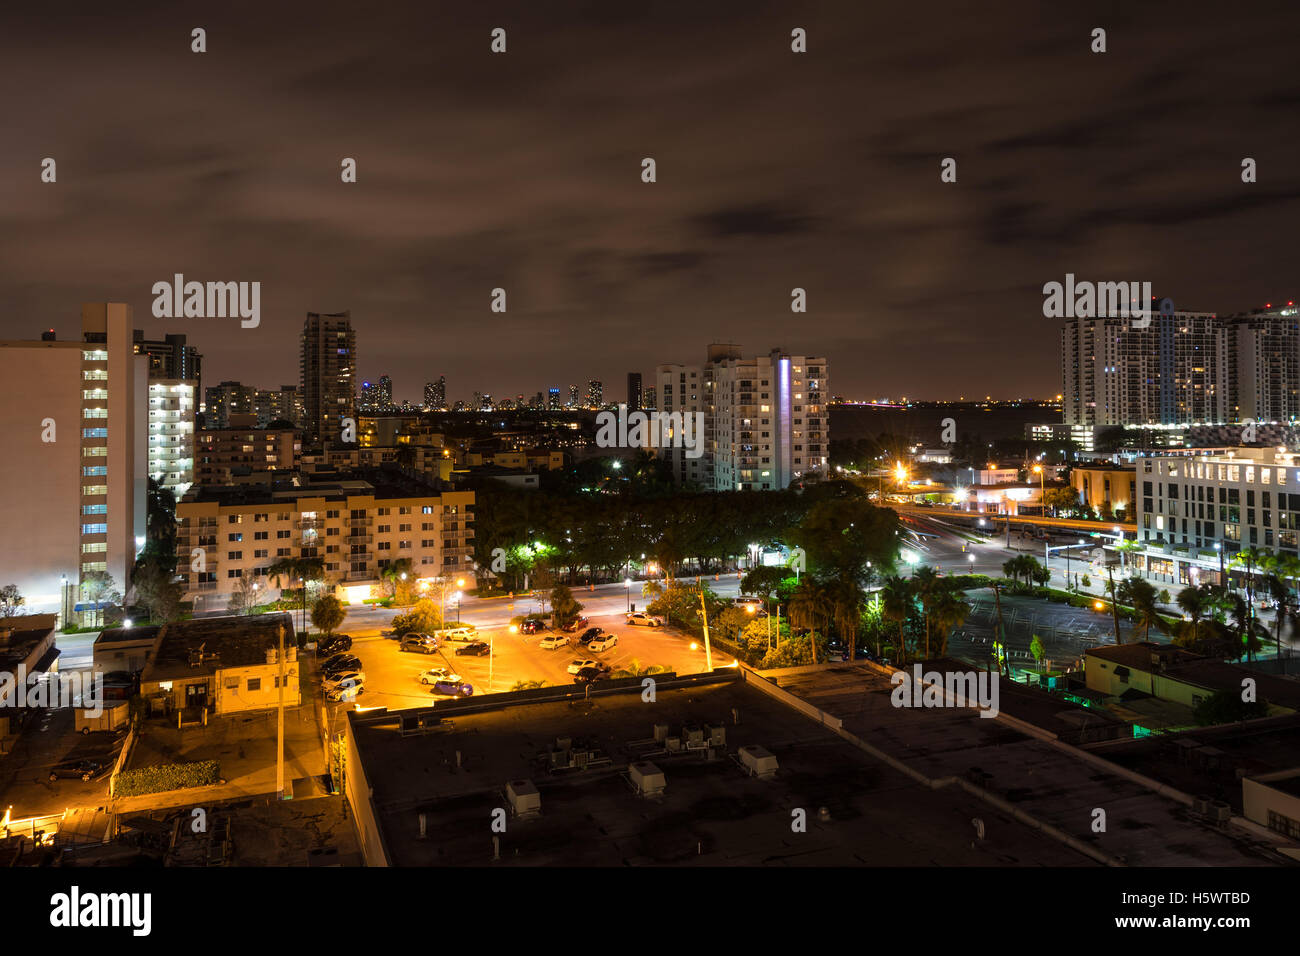 Long exposition night shot of Miami Beach, Florida, with Downtown Miami in the background. Stock Photo